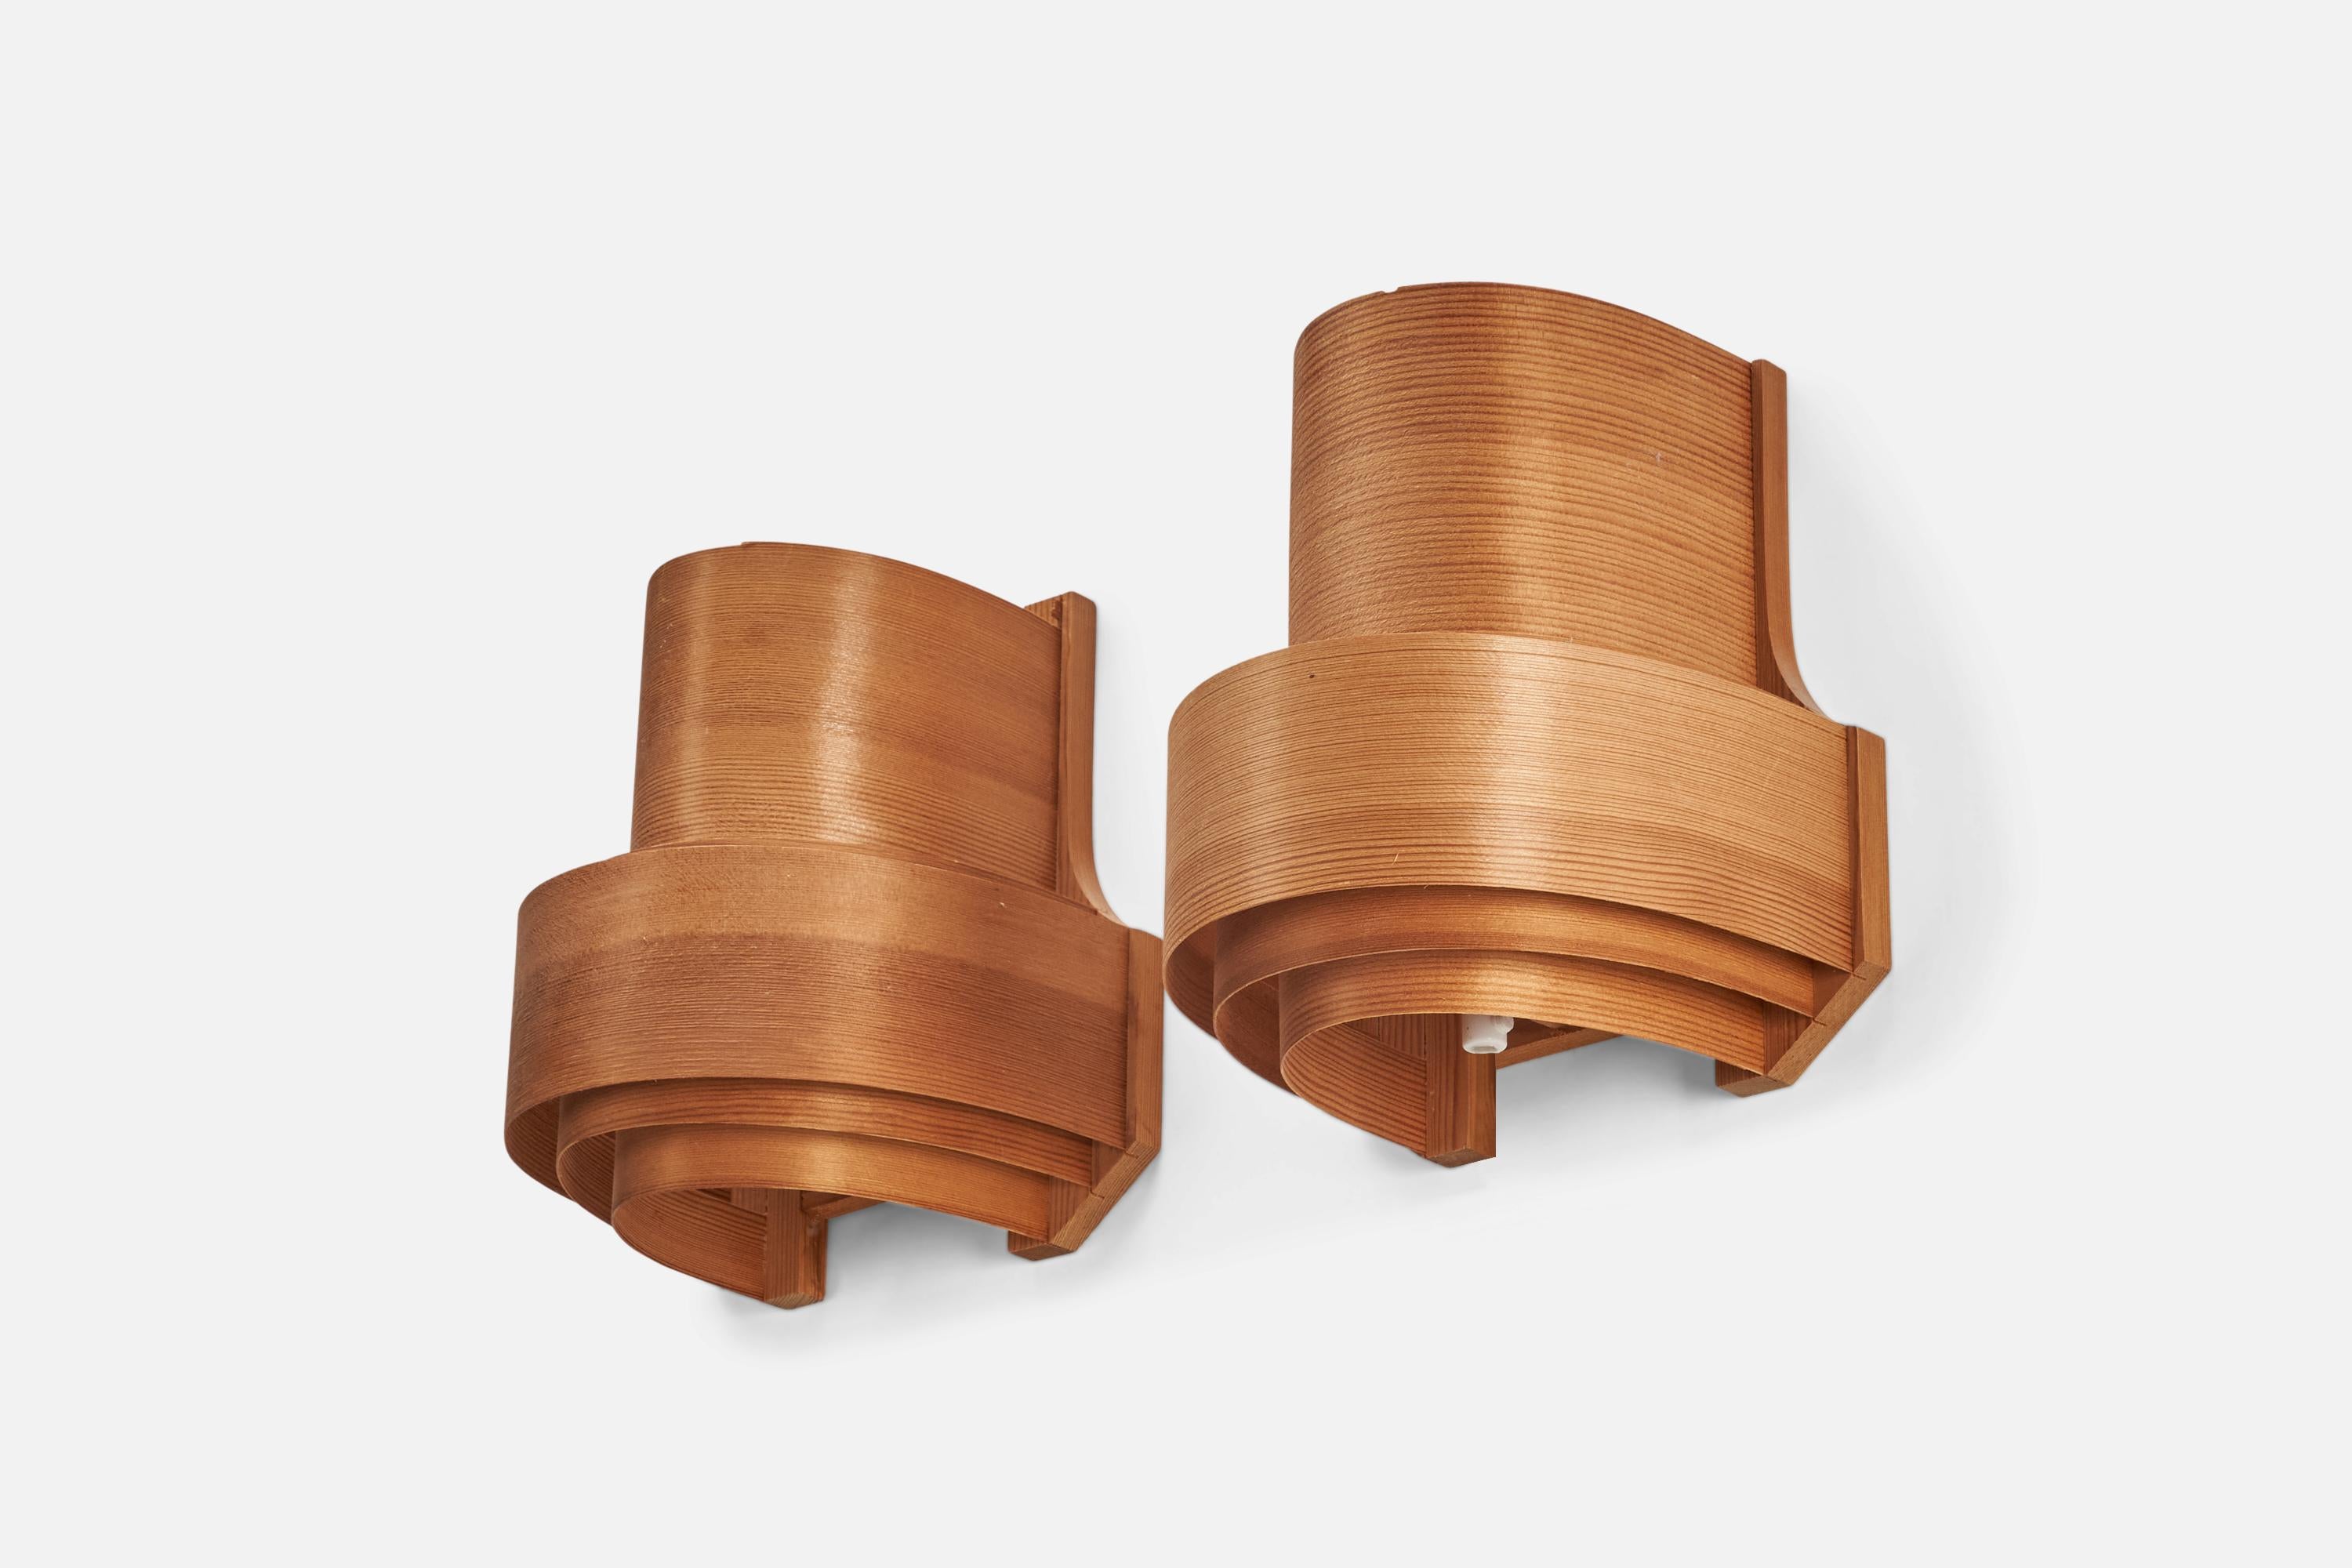 A pair of moulded pine veneer wall lights designed and produced by a Danish Designer, Denmark, 1970s.